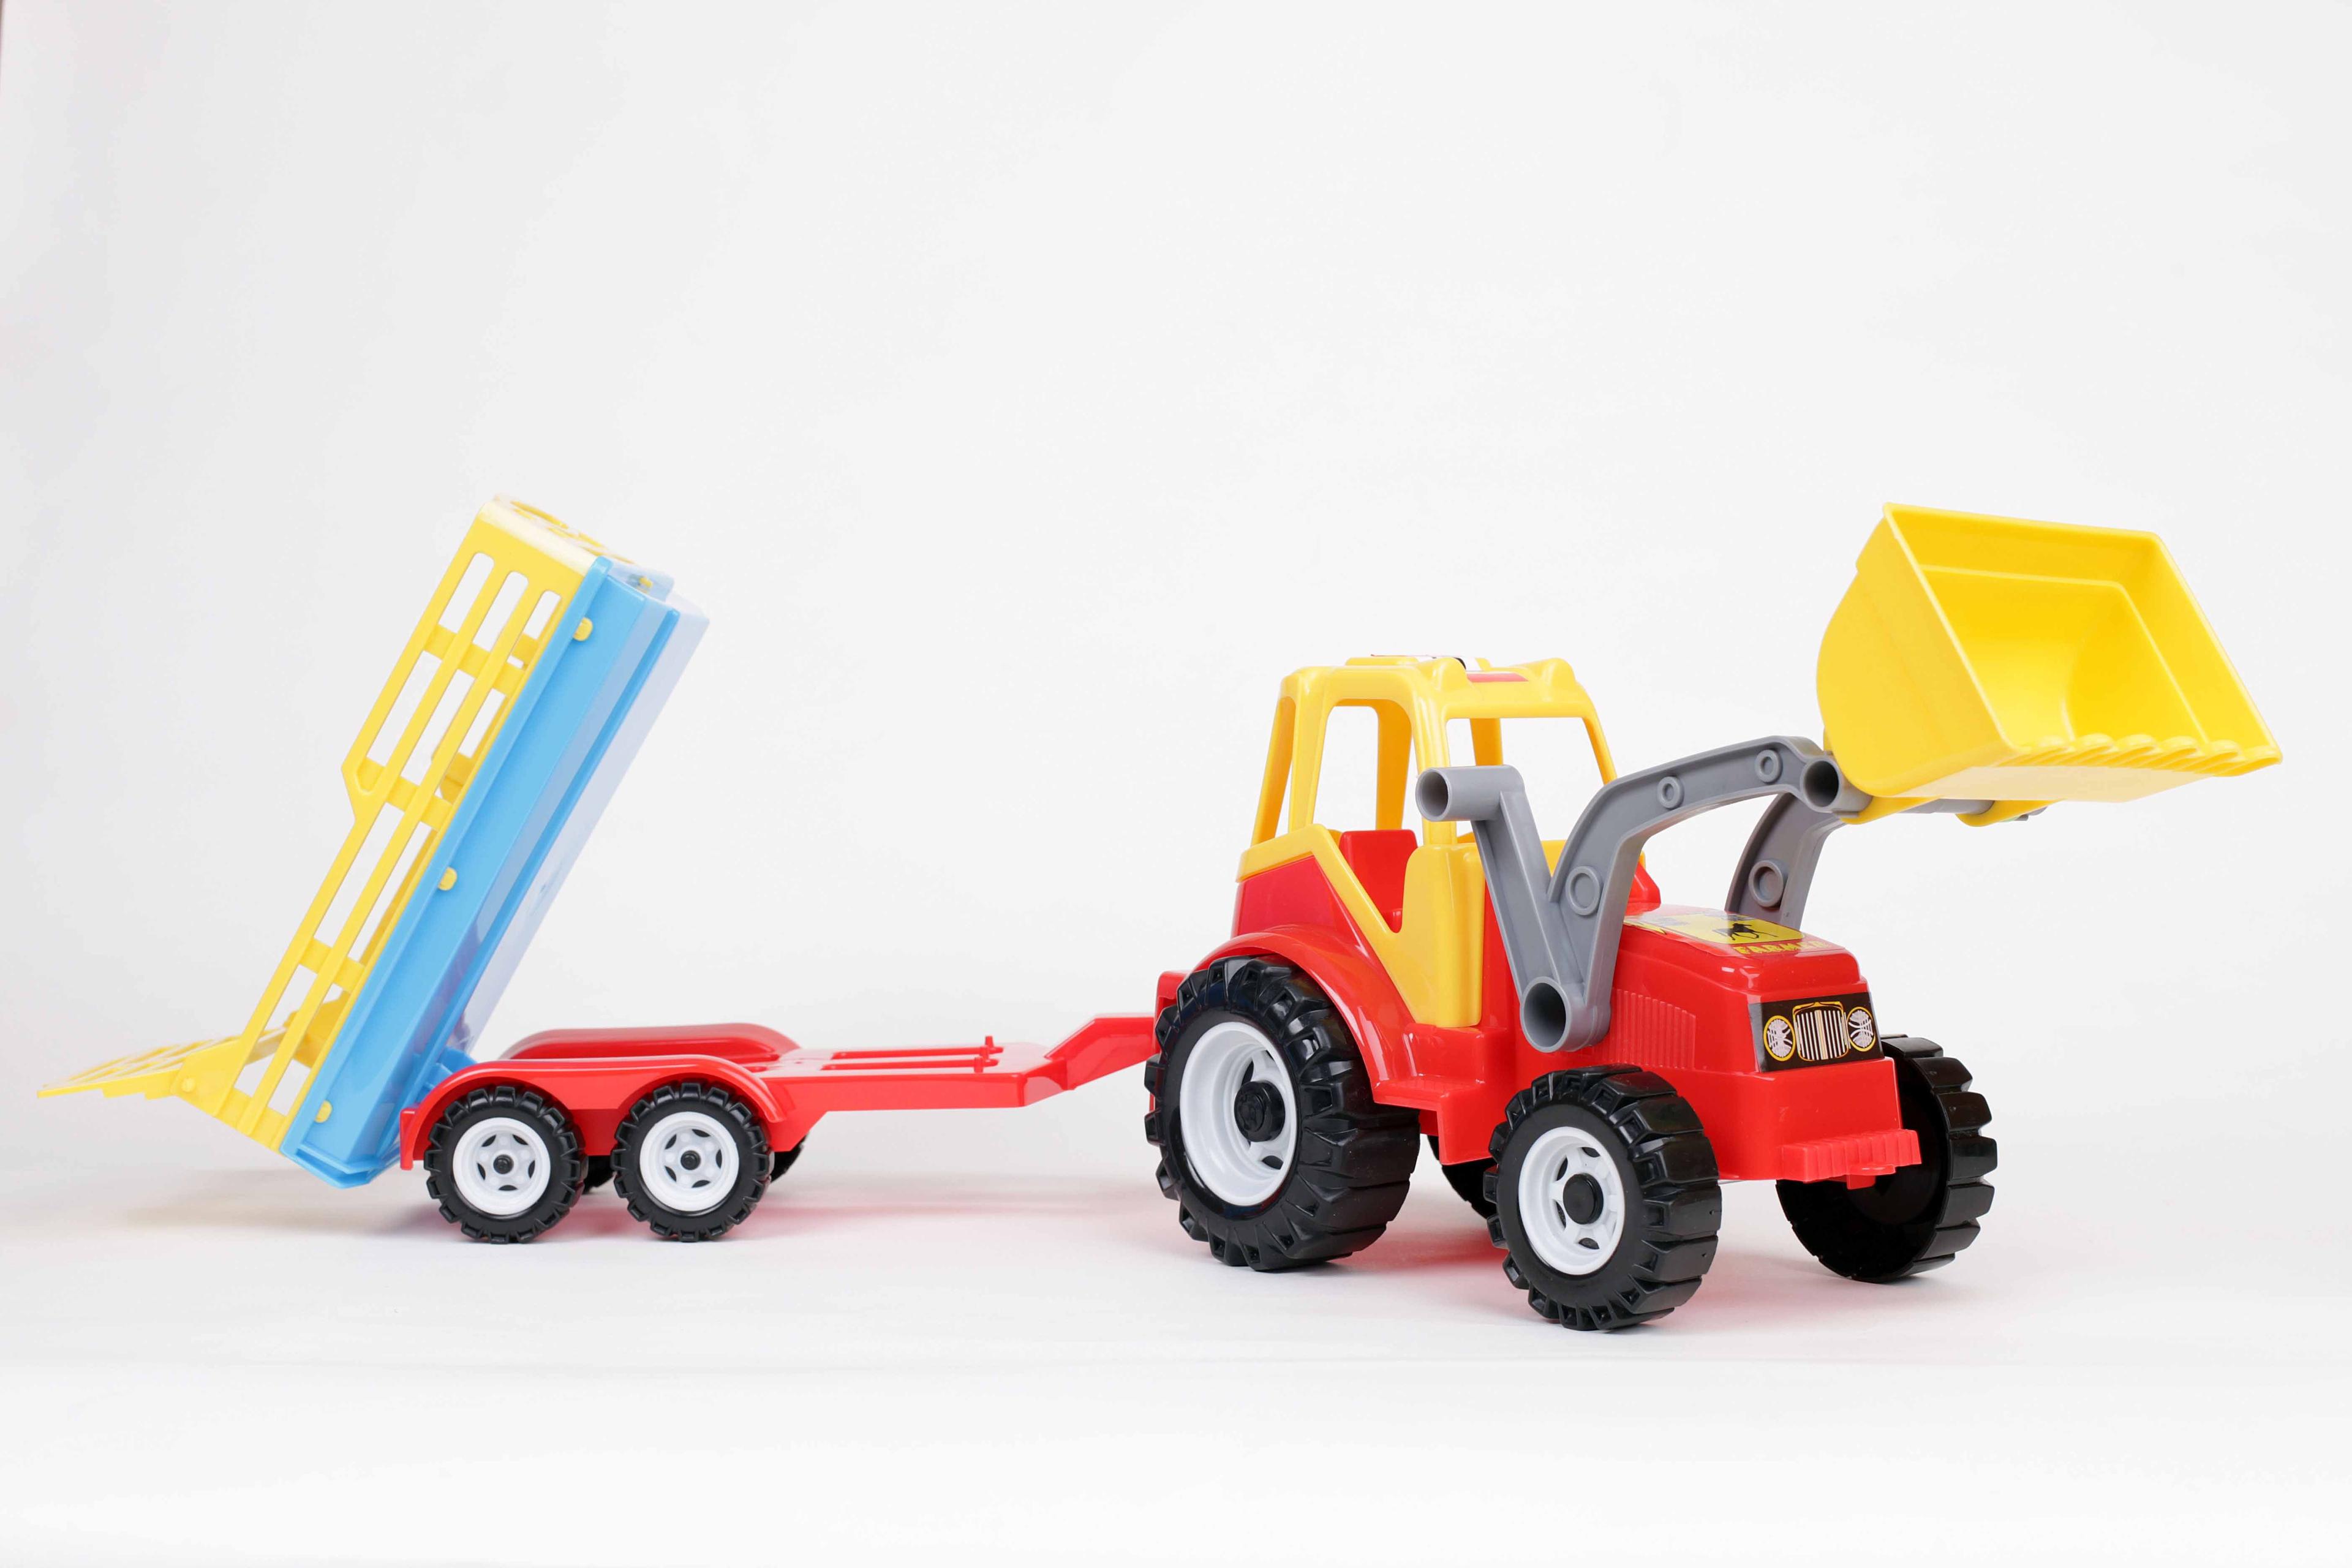 Tractor with loader and trailer - model 084